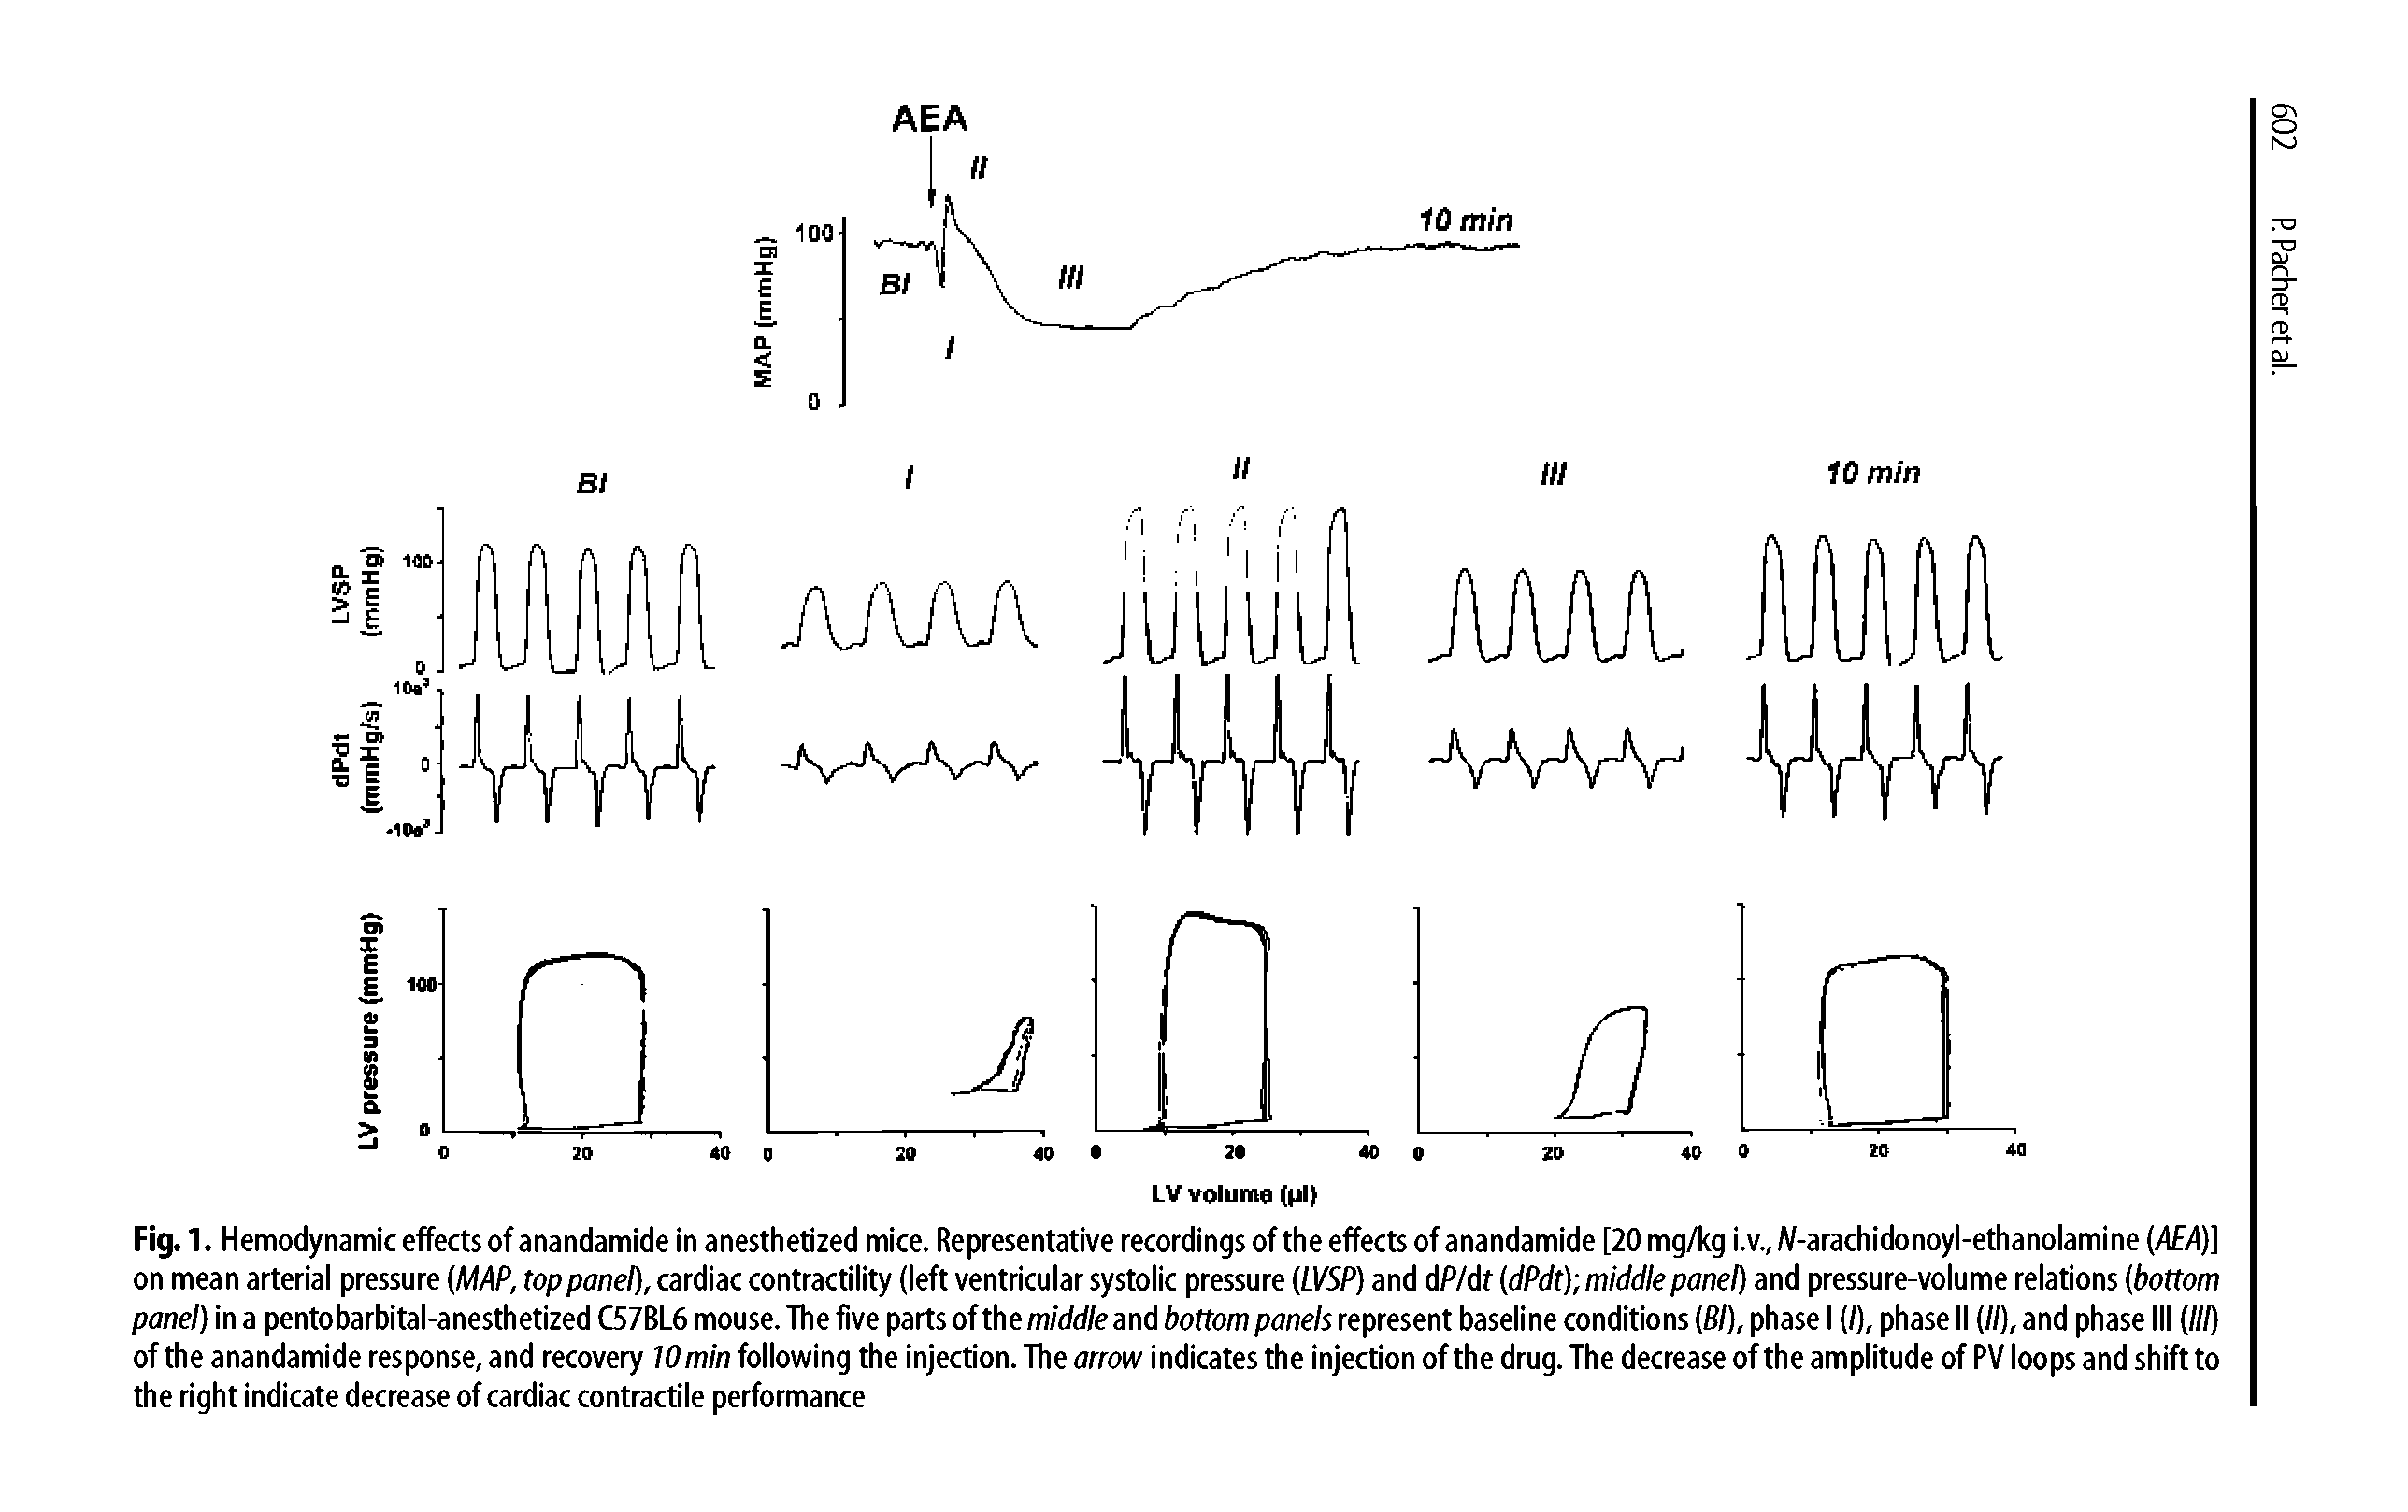 Fig. 1. Hemodynamic effects of anandamide in anesthetized mice. Representative recordings ofthe effects of anandamide [20 mg/kg i.v., W-arachidonoyl-ethanolamine (/1 4)] on mean arterial pressure (iW/iP, top panel, cardiac contractility (left ventricular systolic pressure LVSP and dP/df (dPdt) middle panel and pressure-volume relations (bottom panel in a pentobarbital-anesthetized C57BL6 mouse. The five parts of the and bottom panels represent baseline conditions (BI, phase I (/), phase II (//), and phase III (III ofthe anandamide response, and recovery 10 min following the injection. The arrow indicates the injection ofthe drug. The decrease ofthe amplitude of PV loops and shift to the right indicate decrease of cardiac contractile performance...